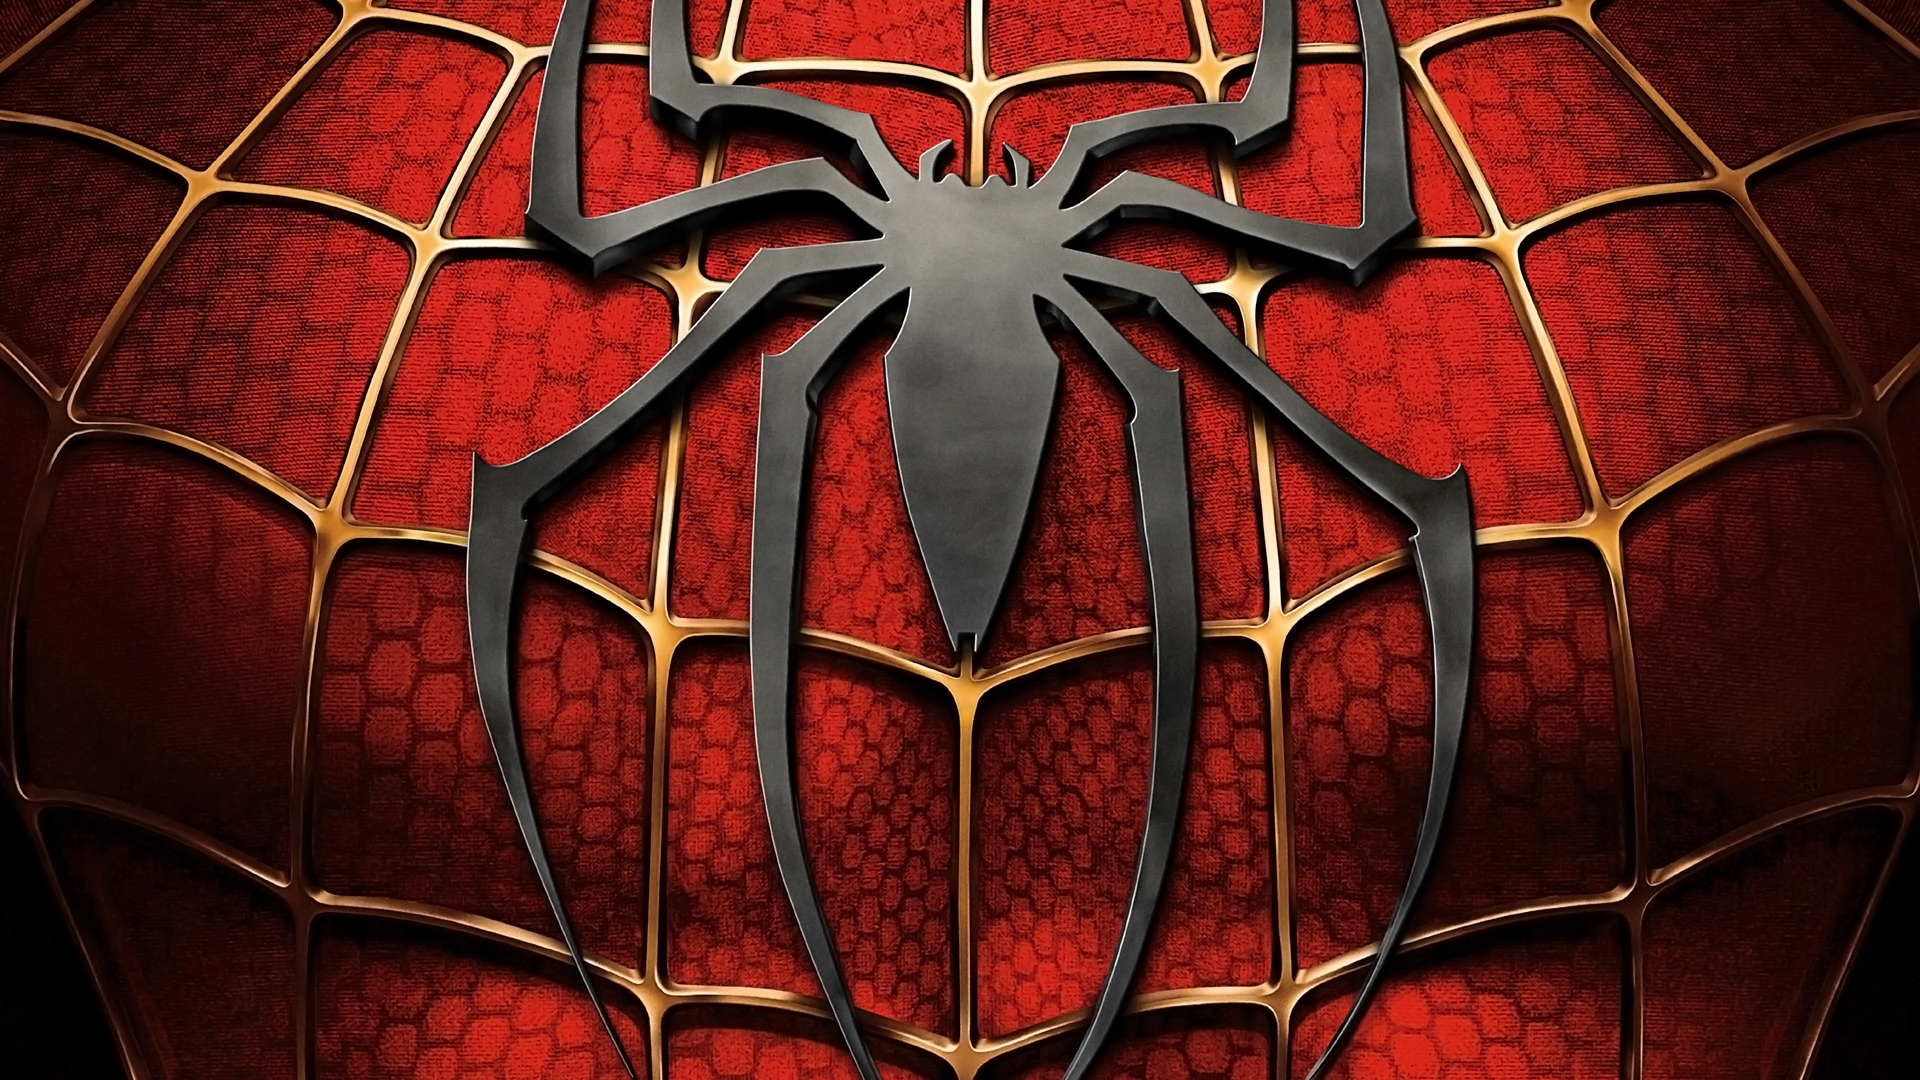 Hope You Like This Spiderman HD Wallpaper As Much We Do